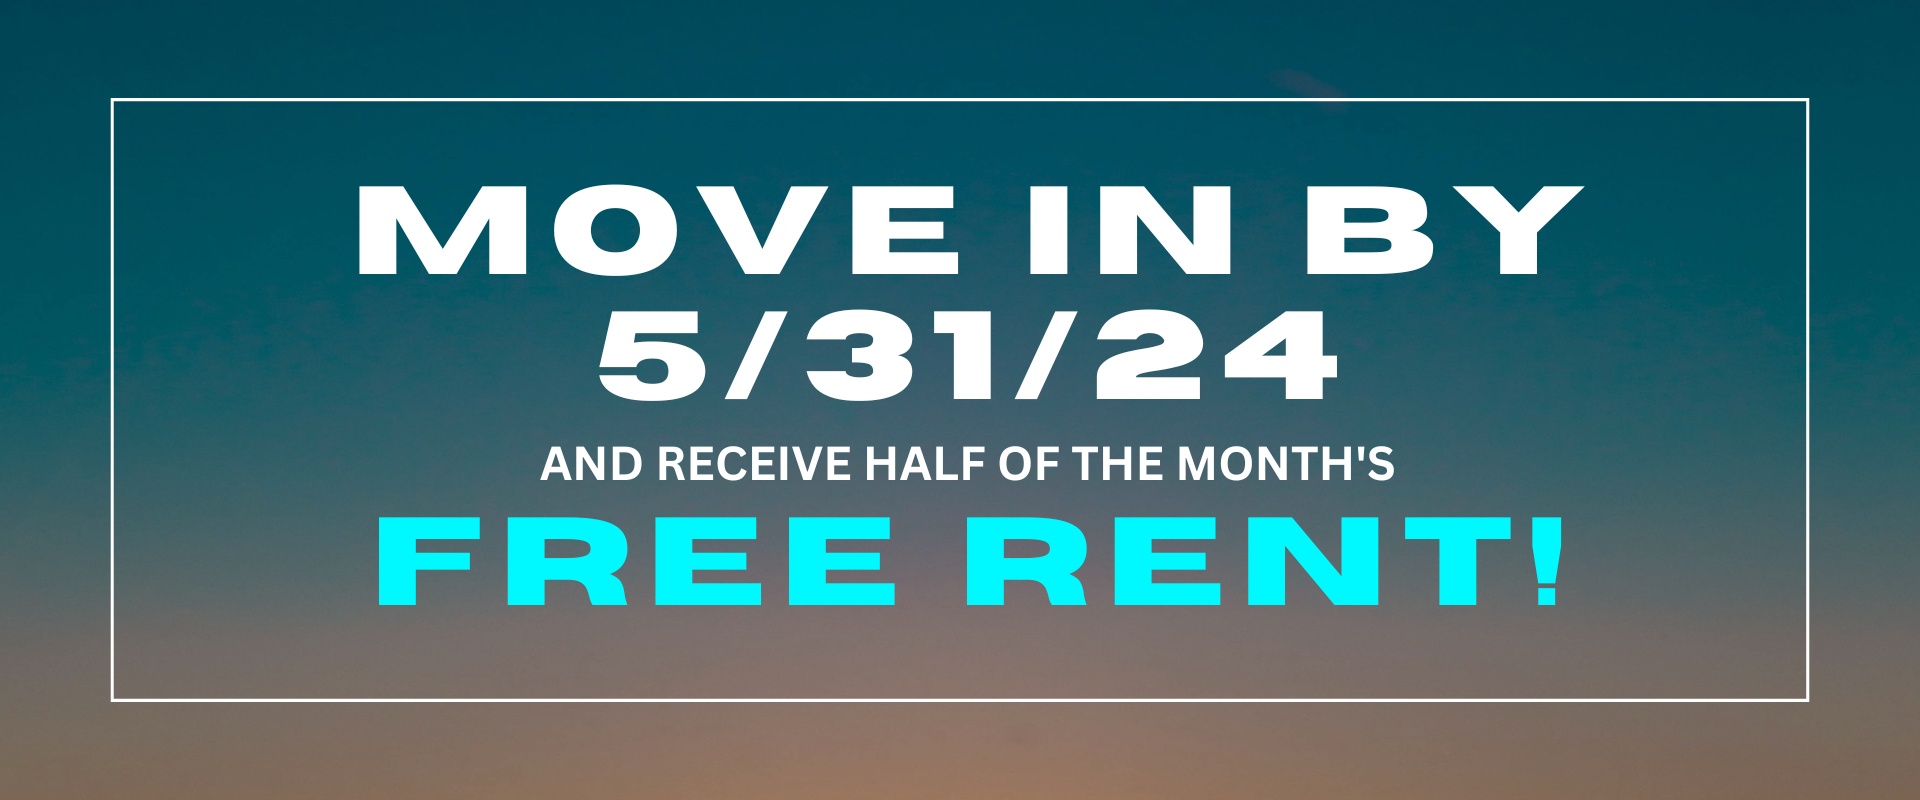 Move in by 5/31/24 and receive half of the month's free rent!